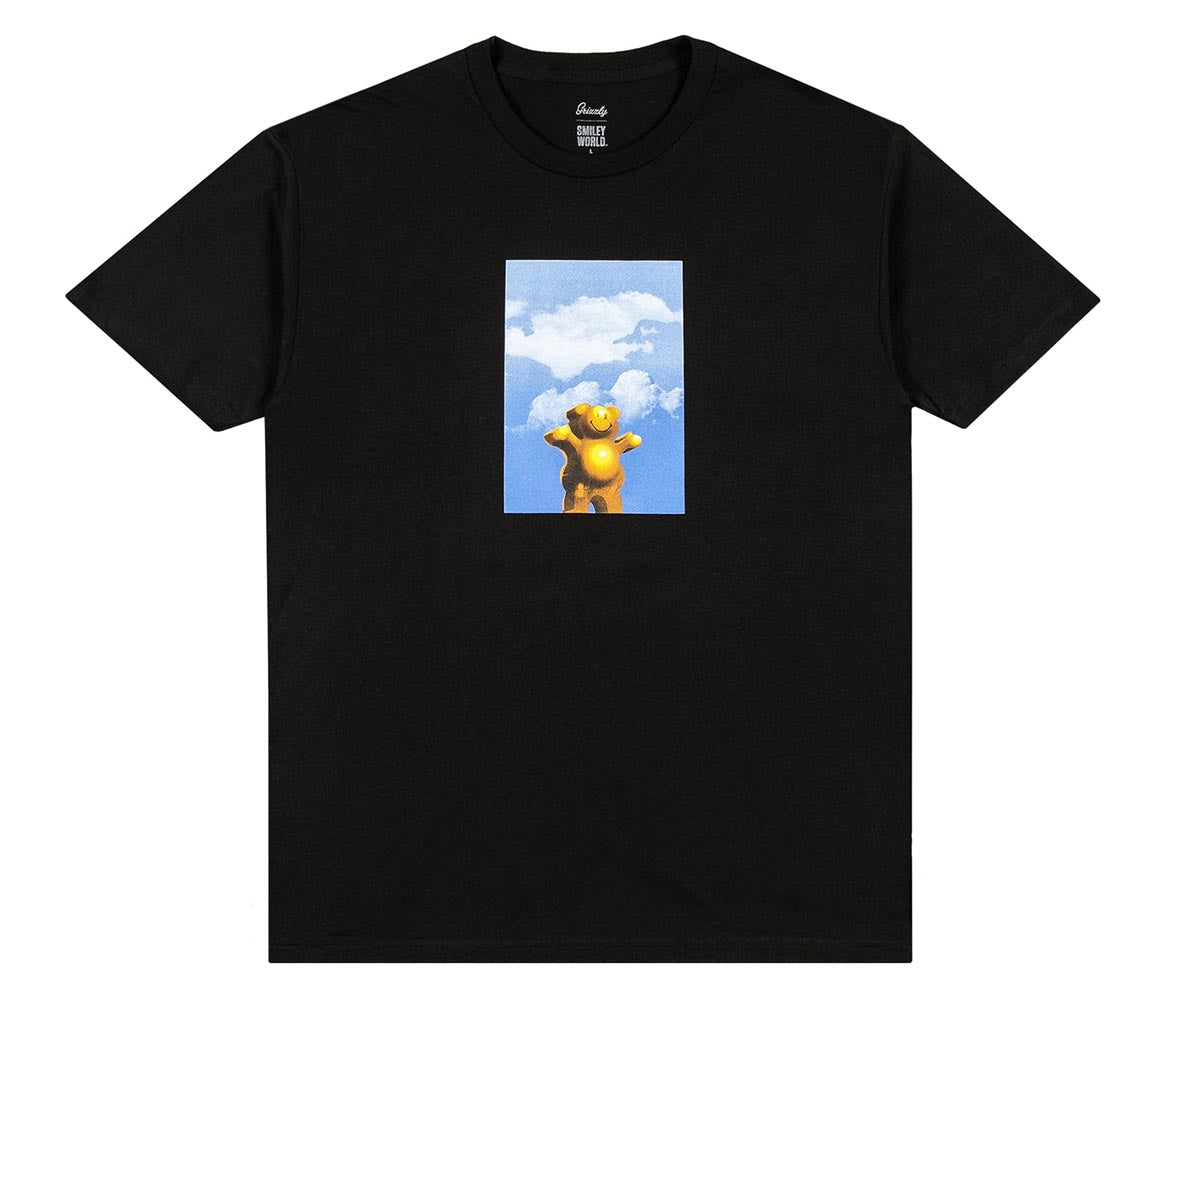 Grizzly x Smiley World Larger Than Life T-Shirt - Black image 1